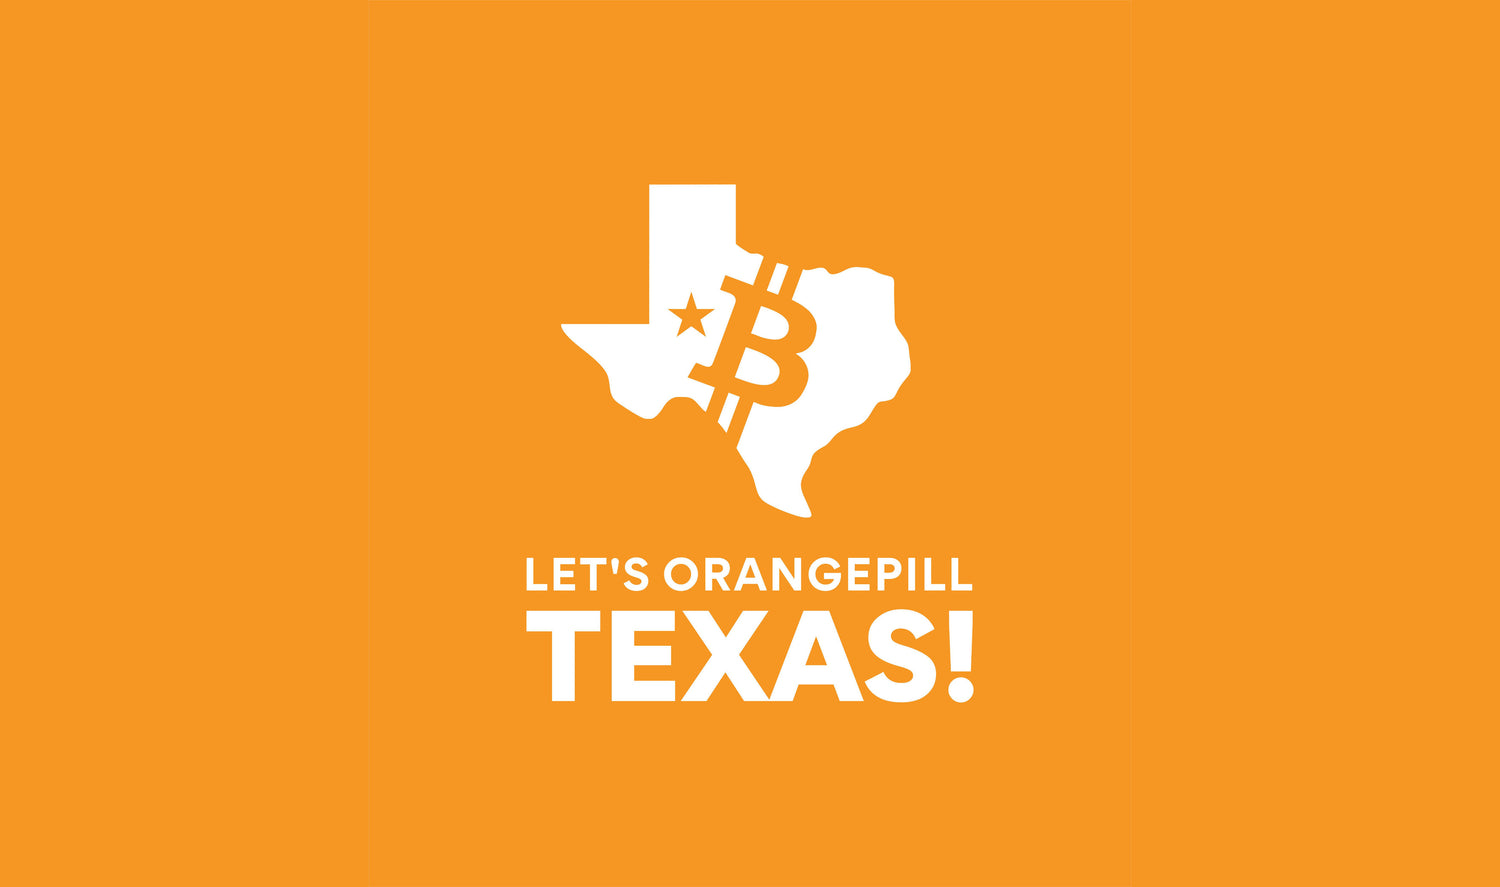 The Texas Bitcoin Project needs your help to orange pill Texas with Bitcoin